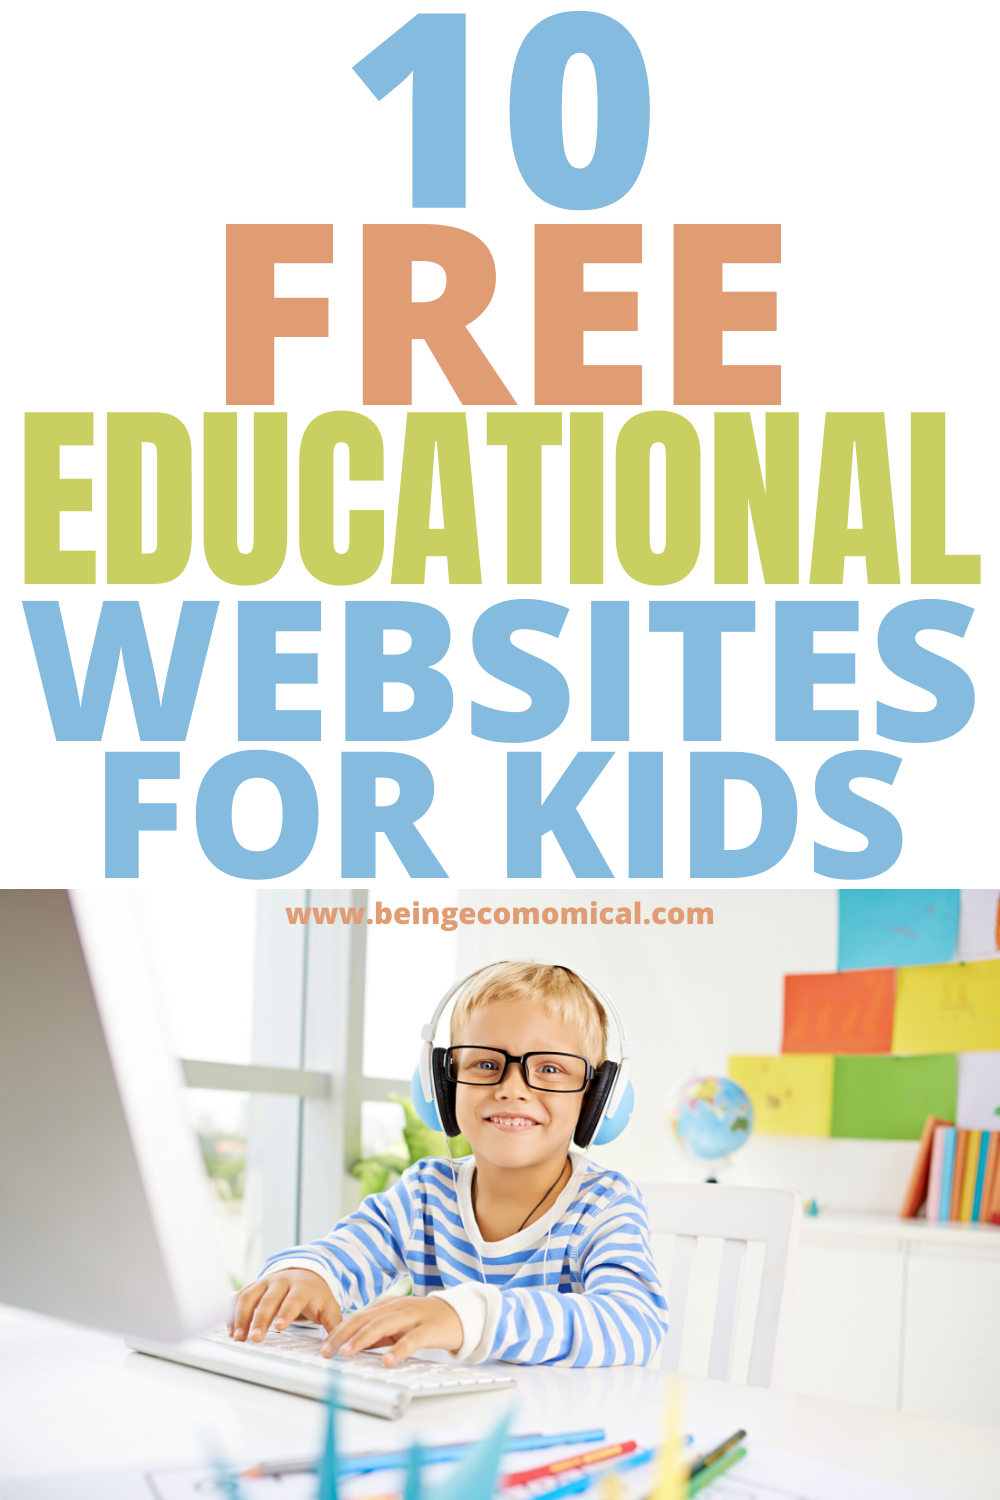 free educational articles for students